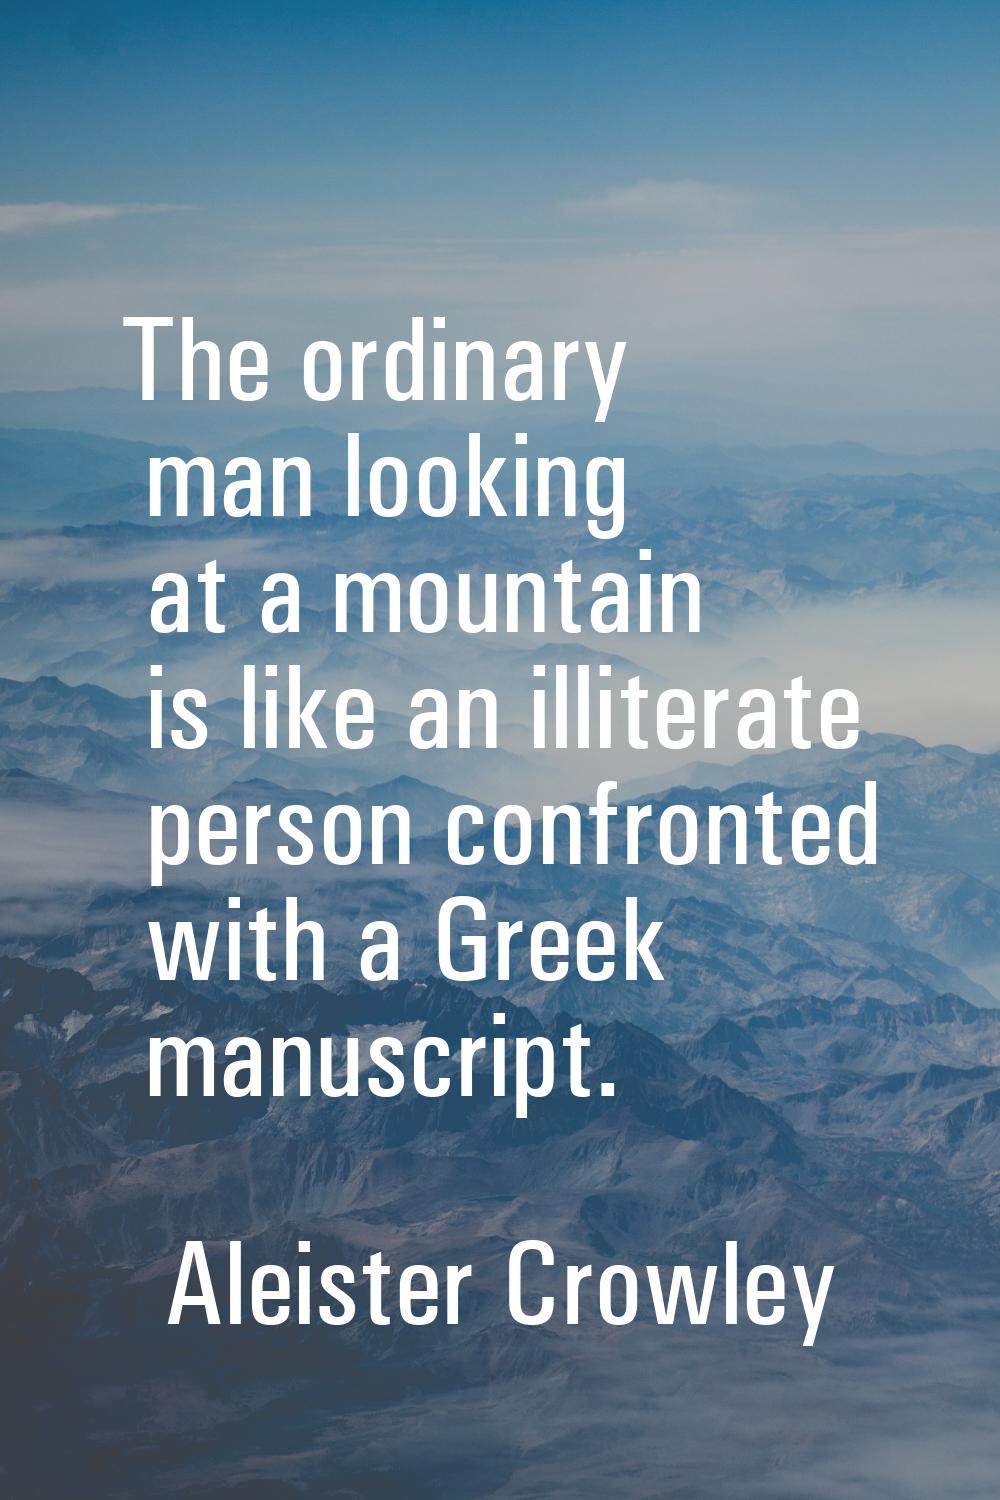 The ordinary man looking at a mountain is like an illiterate person confronted with a Greek manuscr